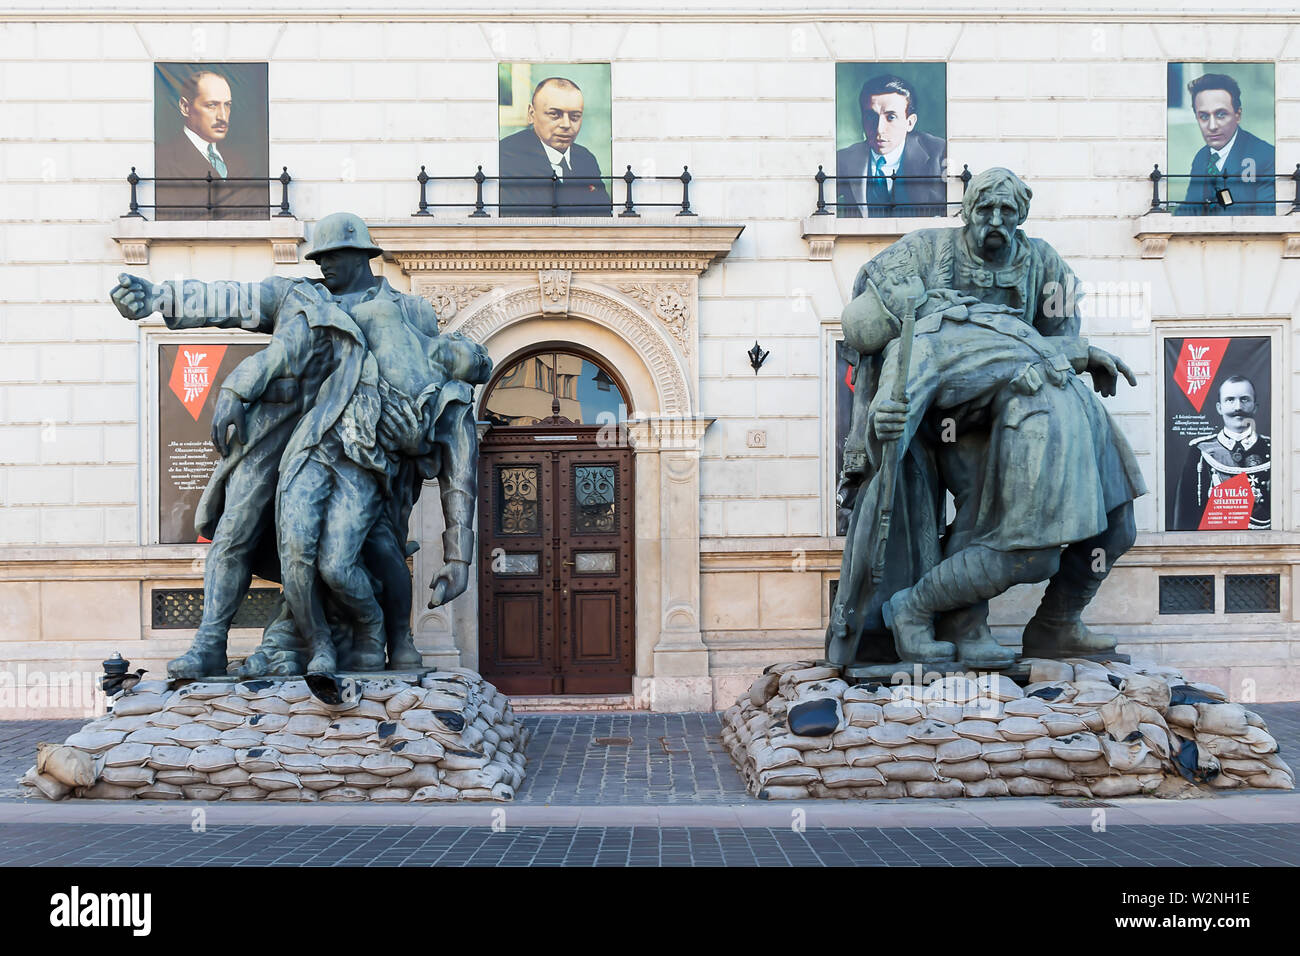 Budapest, Hungary - May 25, 2019 : The Museum of Military History and some of the statues around the building. Located in a former municipal army barr Stock Photo